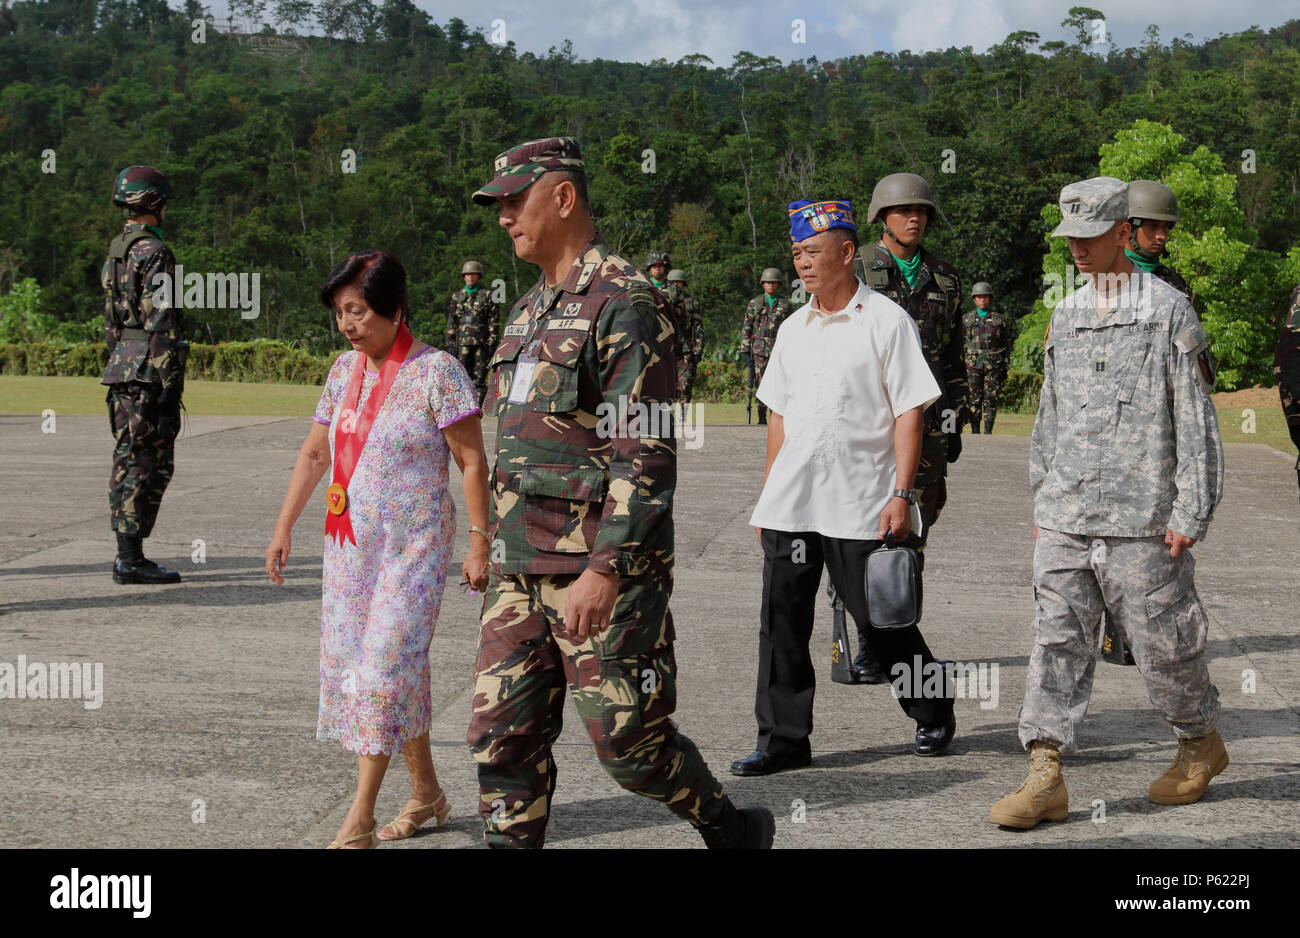 Honorable Ethel R. Jinon, (front, left), Mayor of Jamindan, Capiz, Brig. Gen. Dinoh A. Dolina, Armed Forces of the Philippines (AFP) assistant division commander, 3rd Infantry Division, Retired 2nd Lt. Charlito F. Firma, AFP, and U.S. Army Reserve Cpt. Kevin K. Tran, 303rd Maneuver Enhancement Brigade, operations officer in charge in support of Balikatan 2016 Combined Joint Civil Military Operations Task Force, participates in AFP flag raising ceremony at Camp Peralta, Capiz, Philippines, in memorialization of the historical Bataan Death March of 1942, April 09, 2016.  The ceremony was one of  Stock Photo